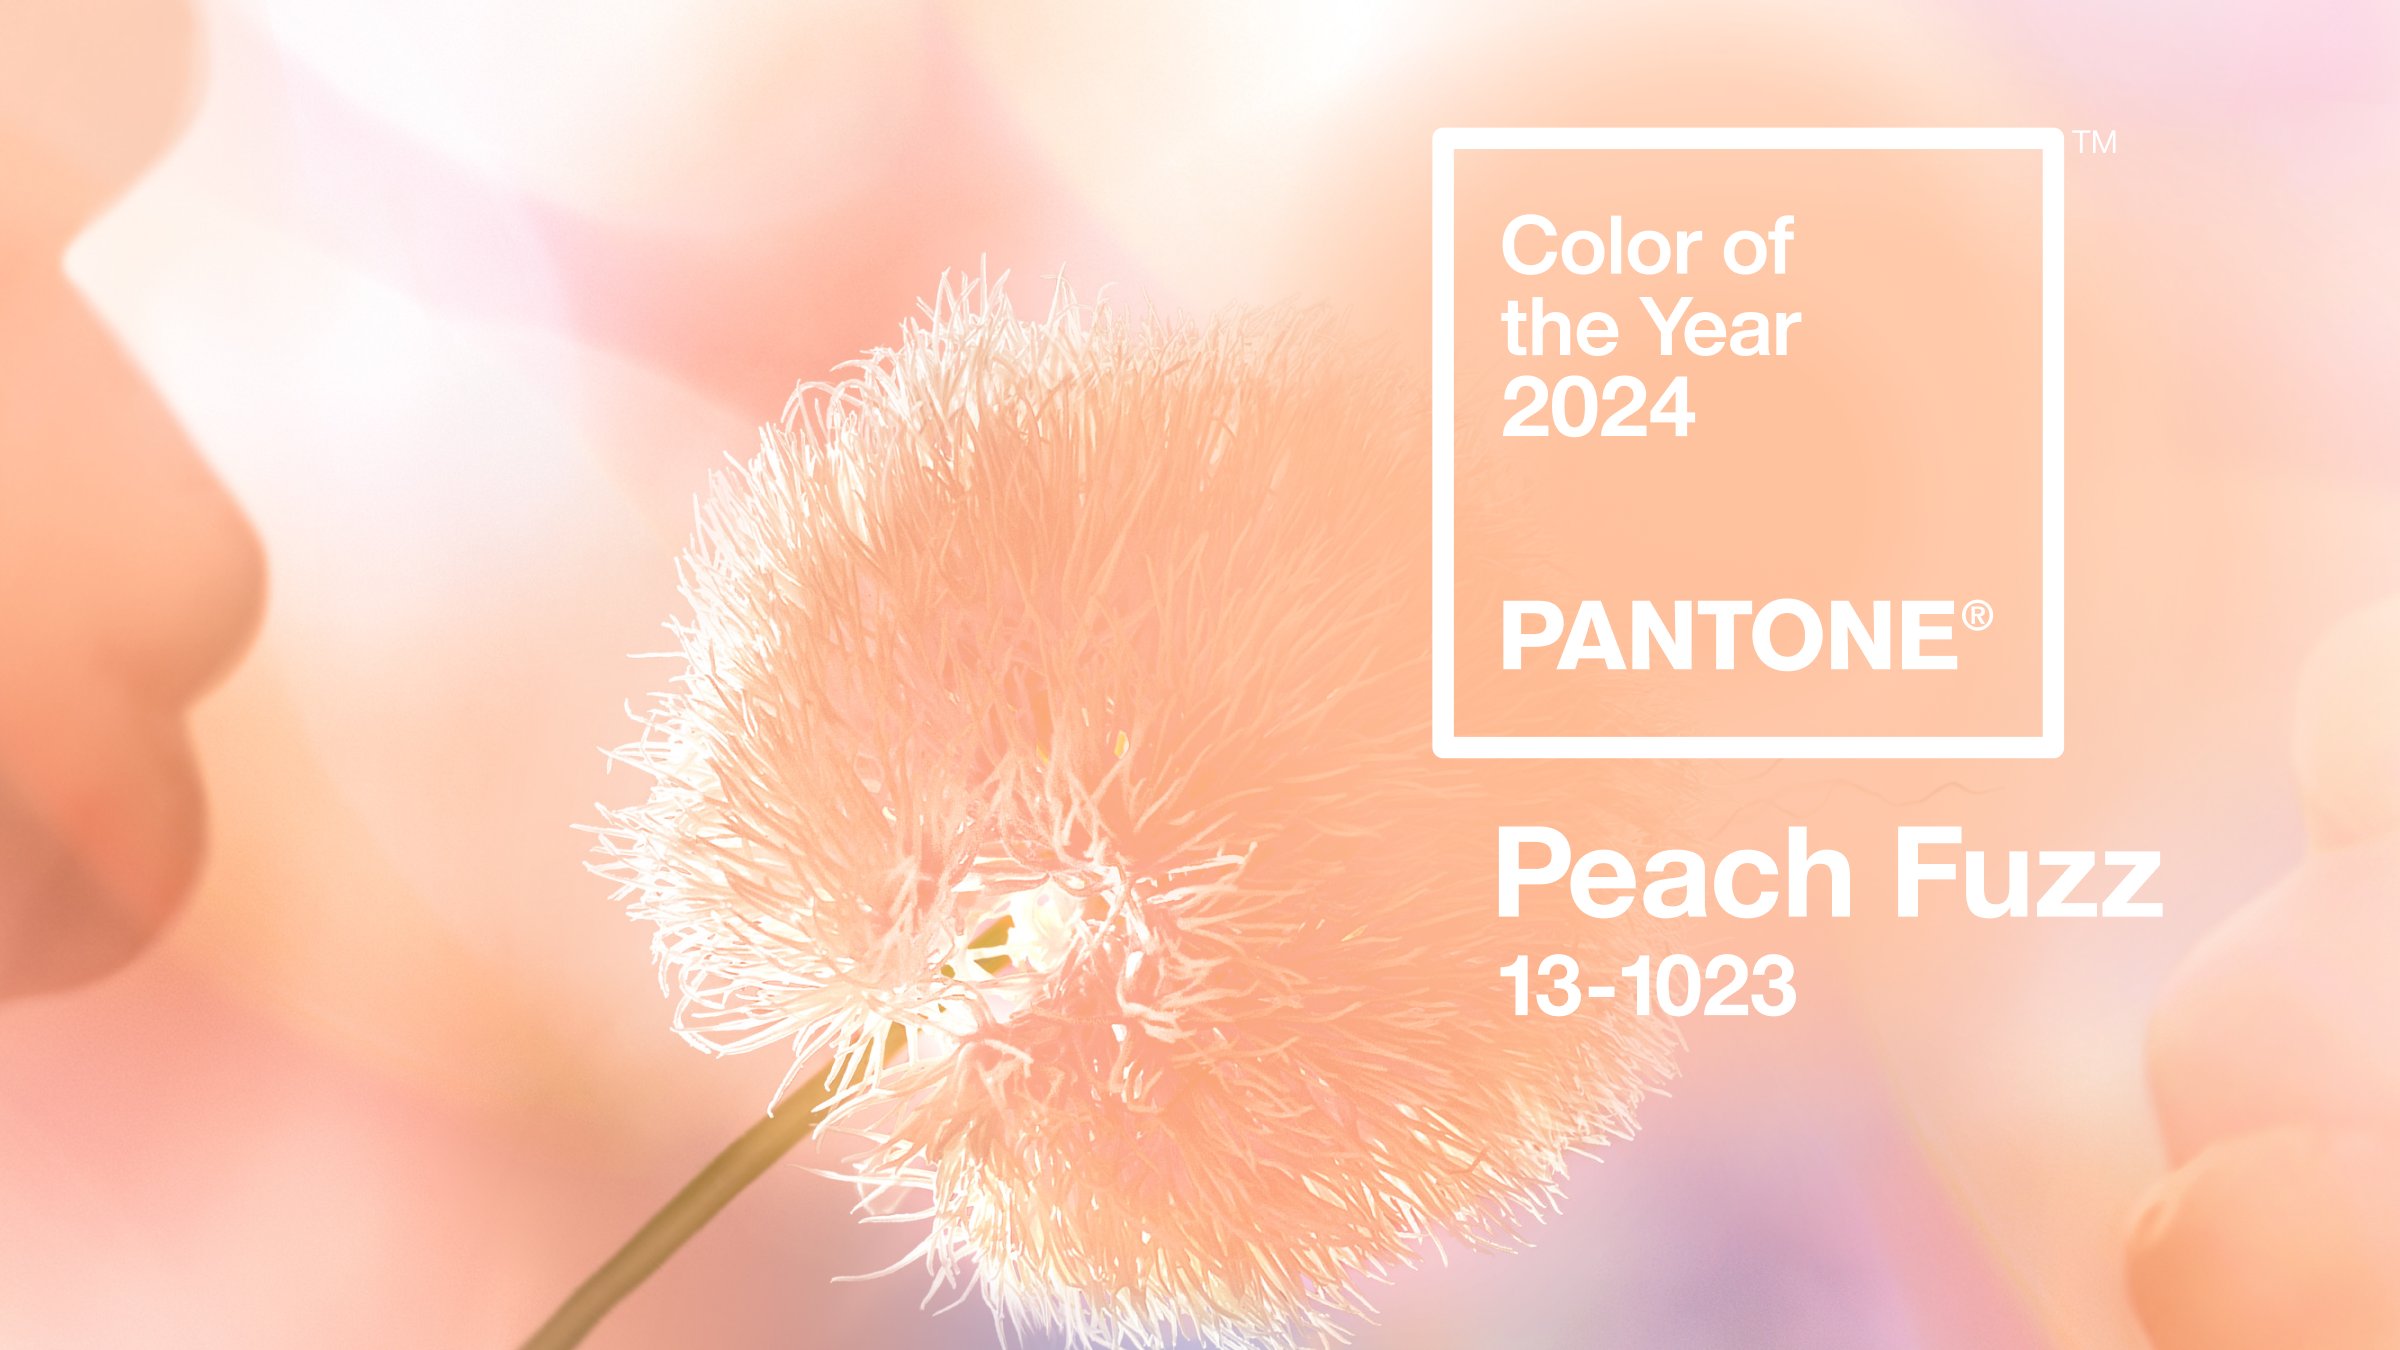 Using Pantone Pastel Colors In Your Brand